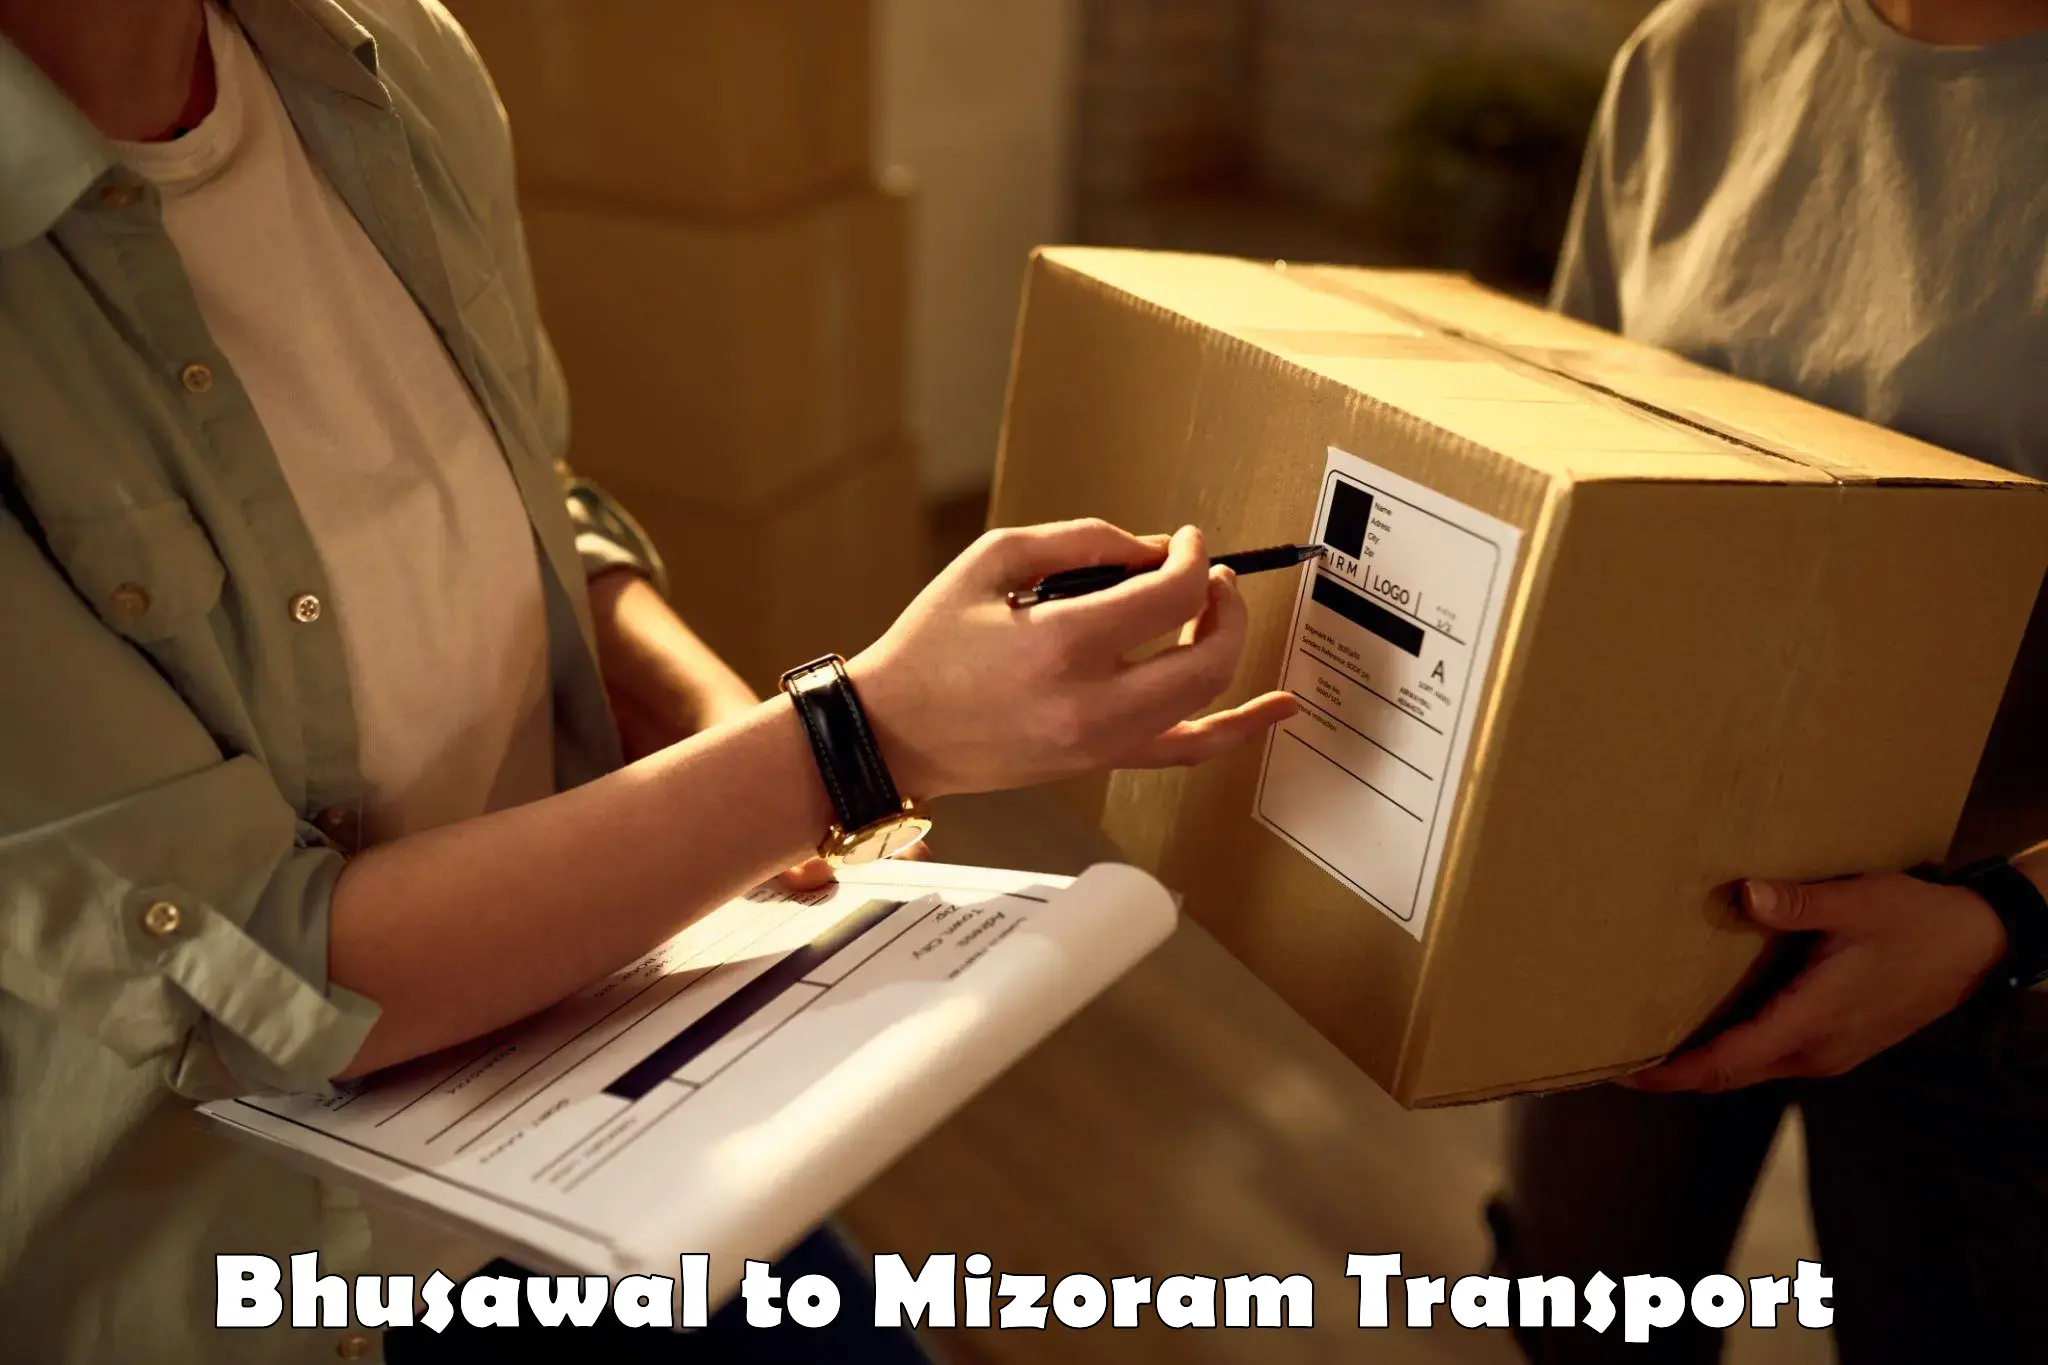 Delivery service Bhusawal to Darlawn